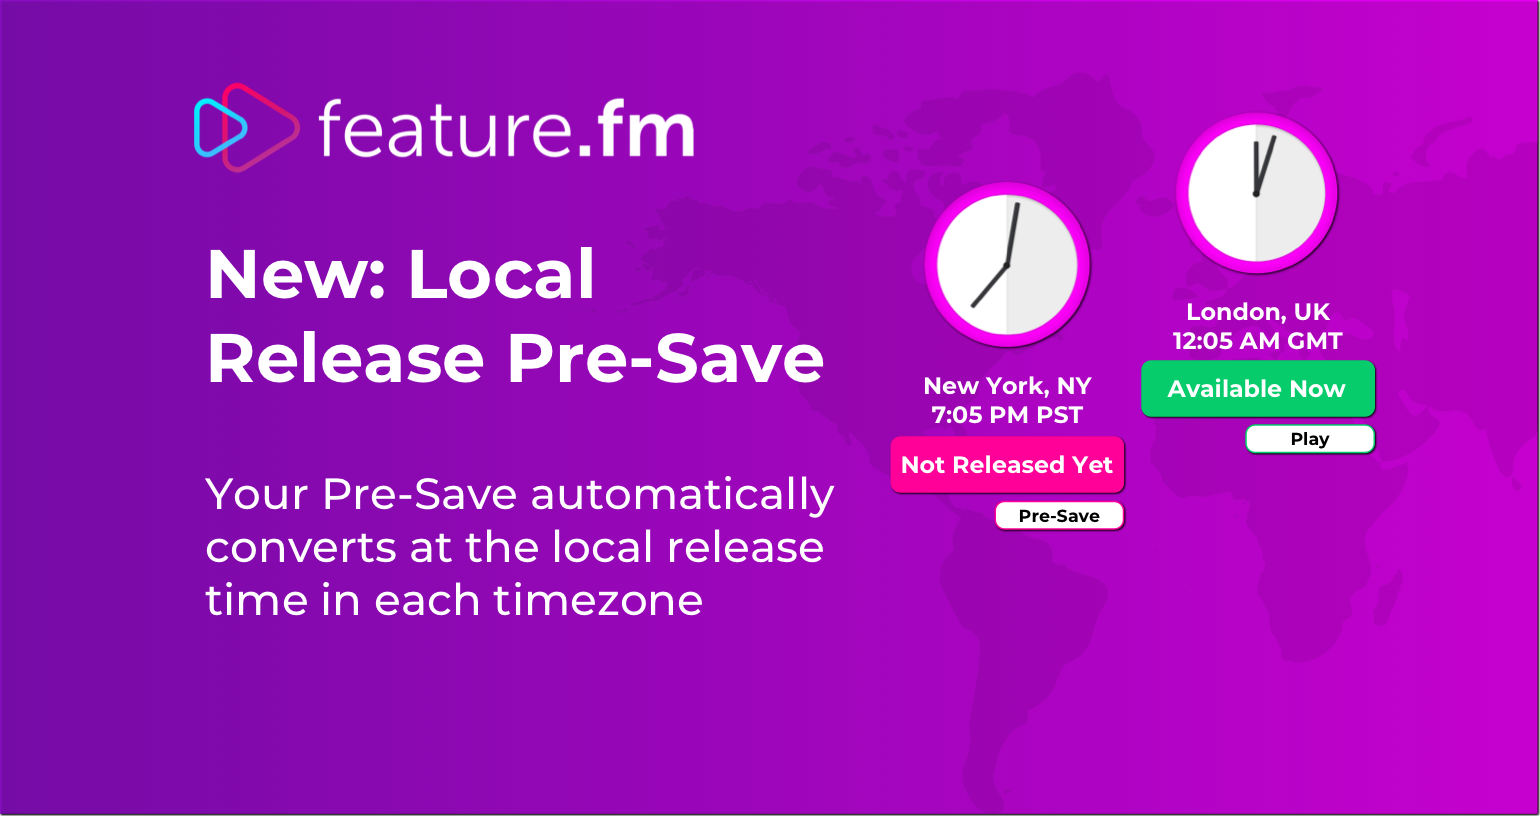 New: Pre-Saves that convert at the local release time in each timezone